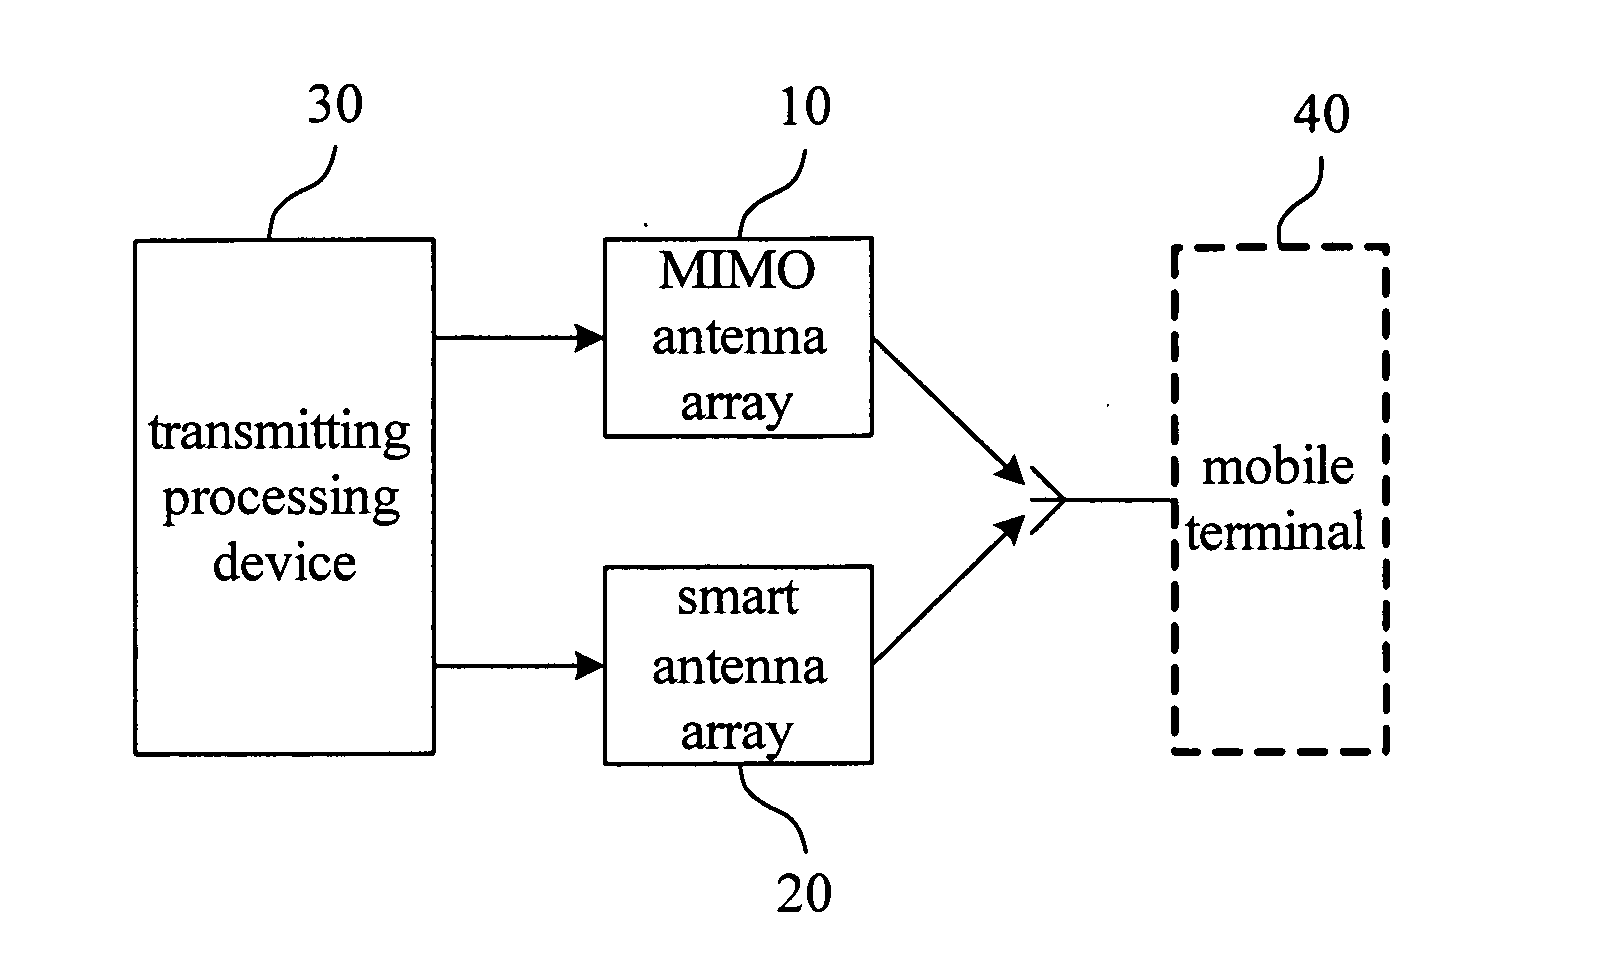 Antenna multiplexing system and method of smart antenna and multiple-input multiple-output antenna